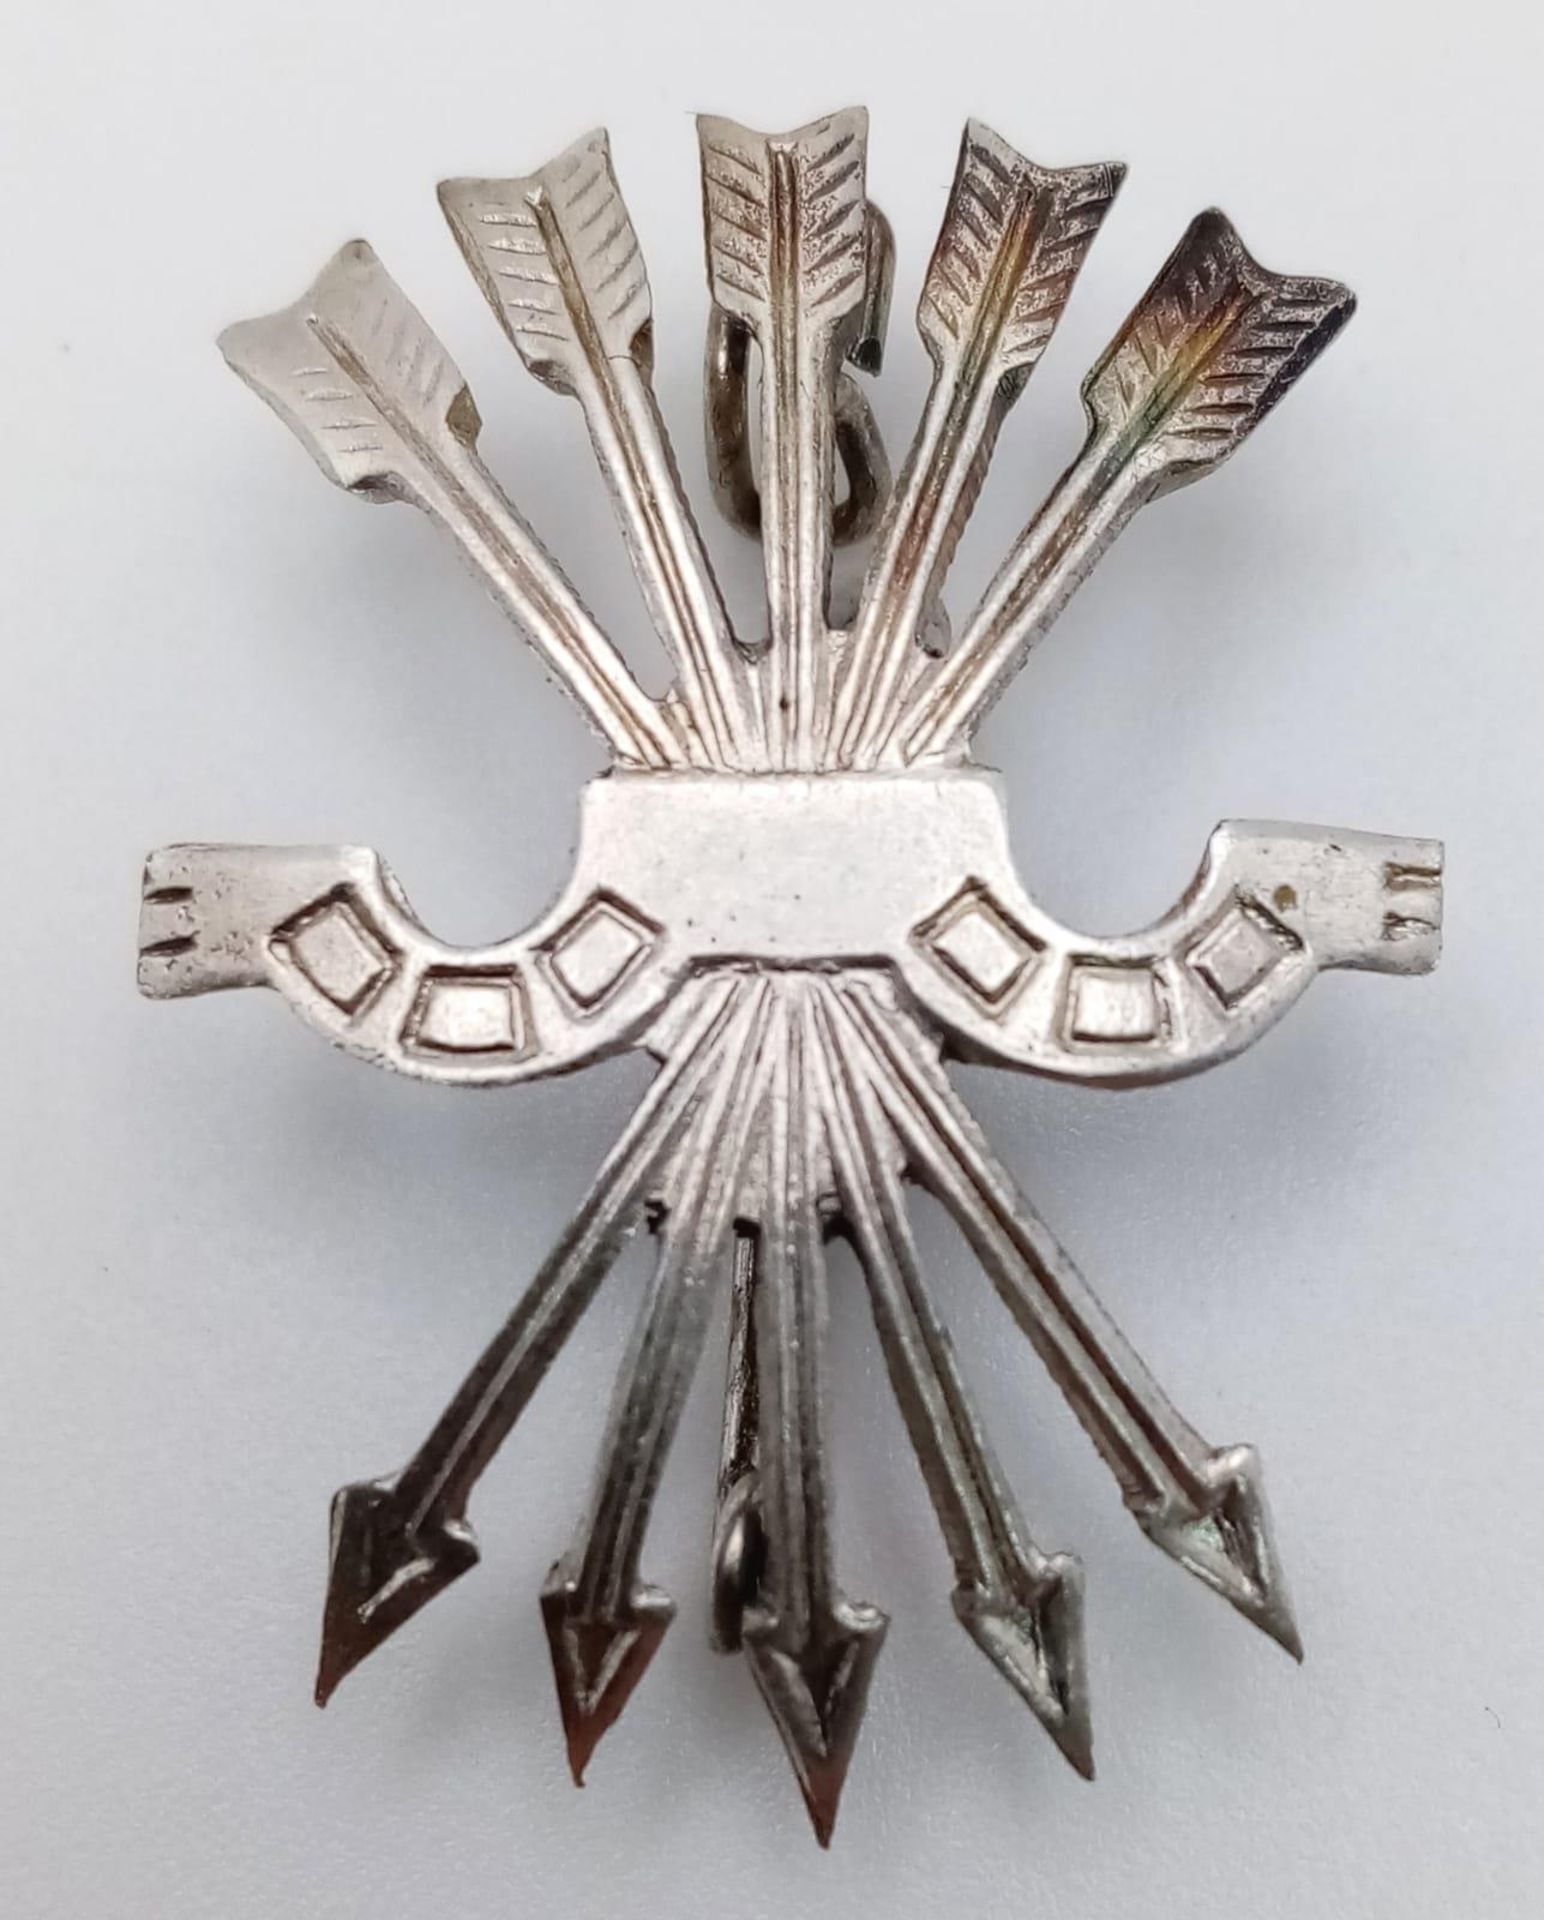 A Spanish Civil War 1936-1939 Falange Badge. Worn by General Franco’s Nationalist Forces, the Condor